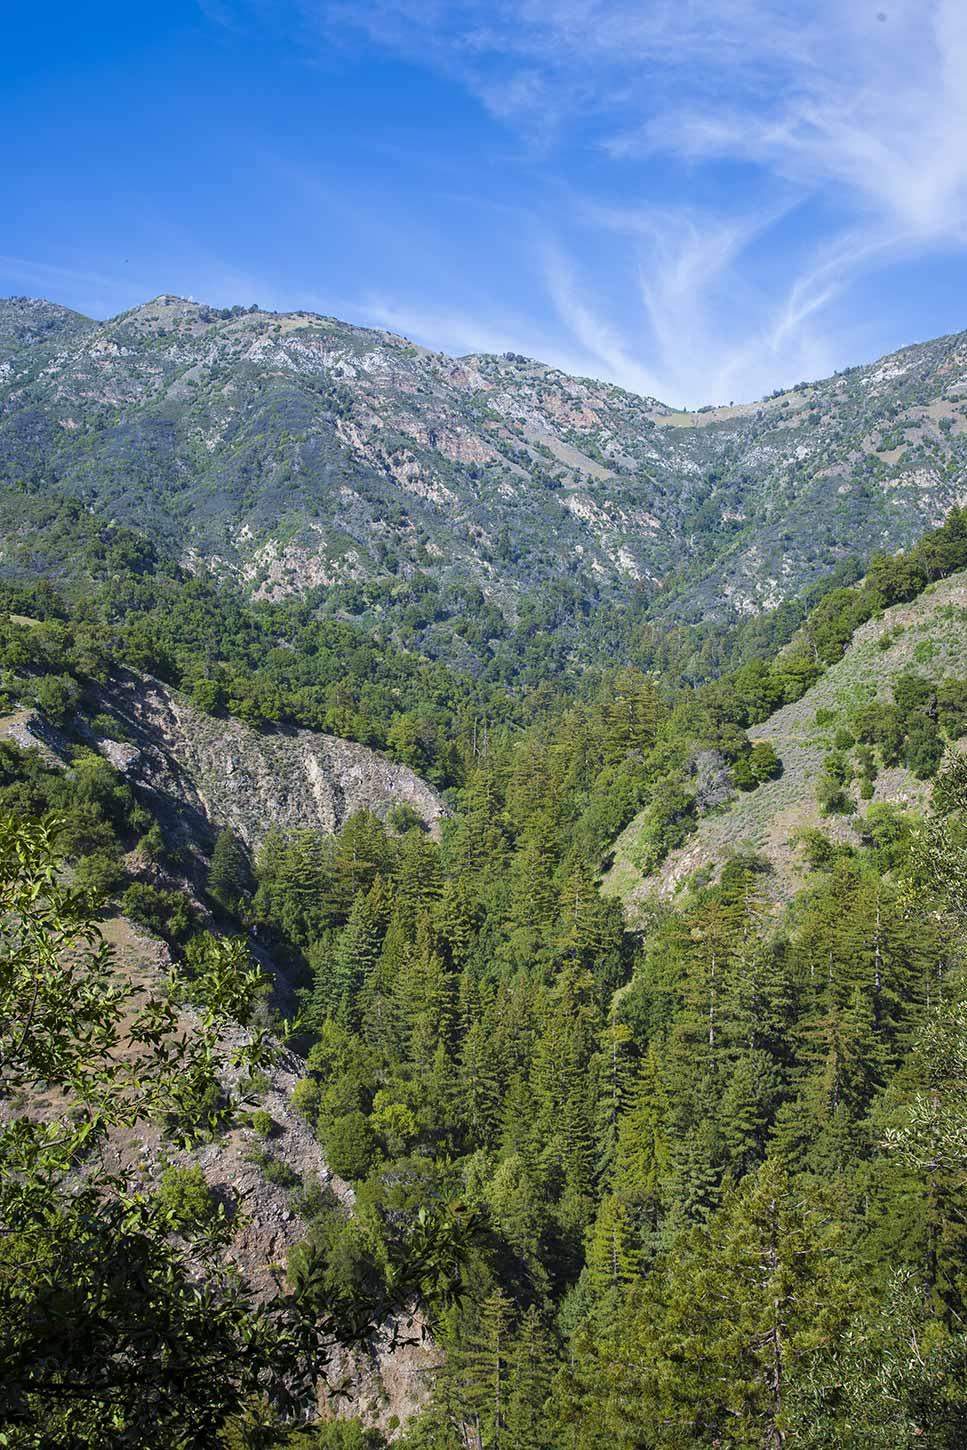 Hare Canyon and Vicente Flat seen from the Kirk Creek Trail in Los Padres National Forest, Big Sur